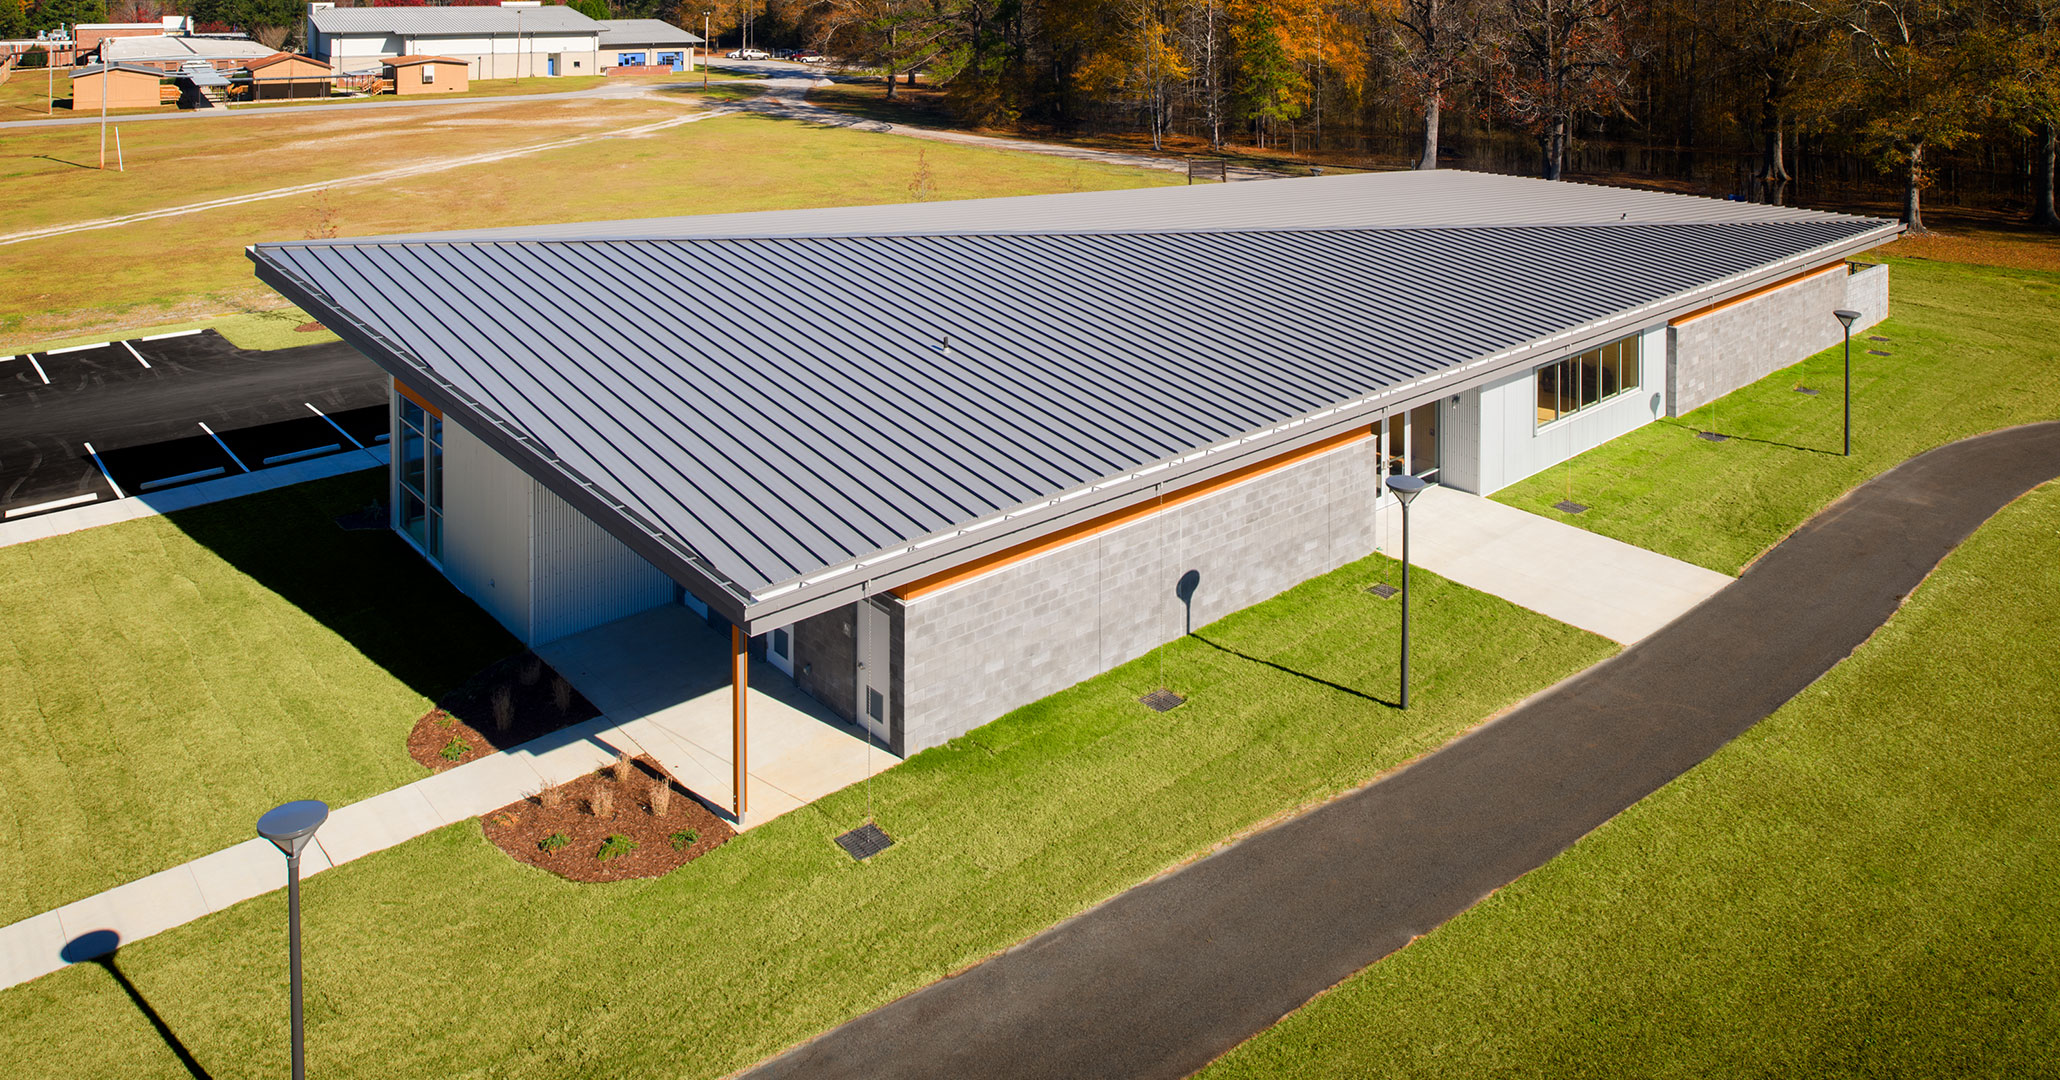 Richland County Recreation Commission worked with Boudreaux to design a modern community center.